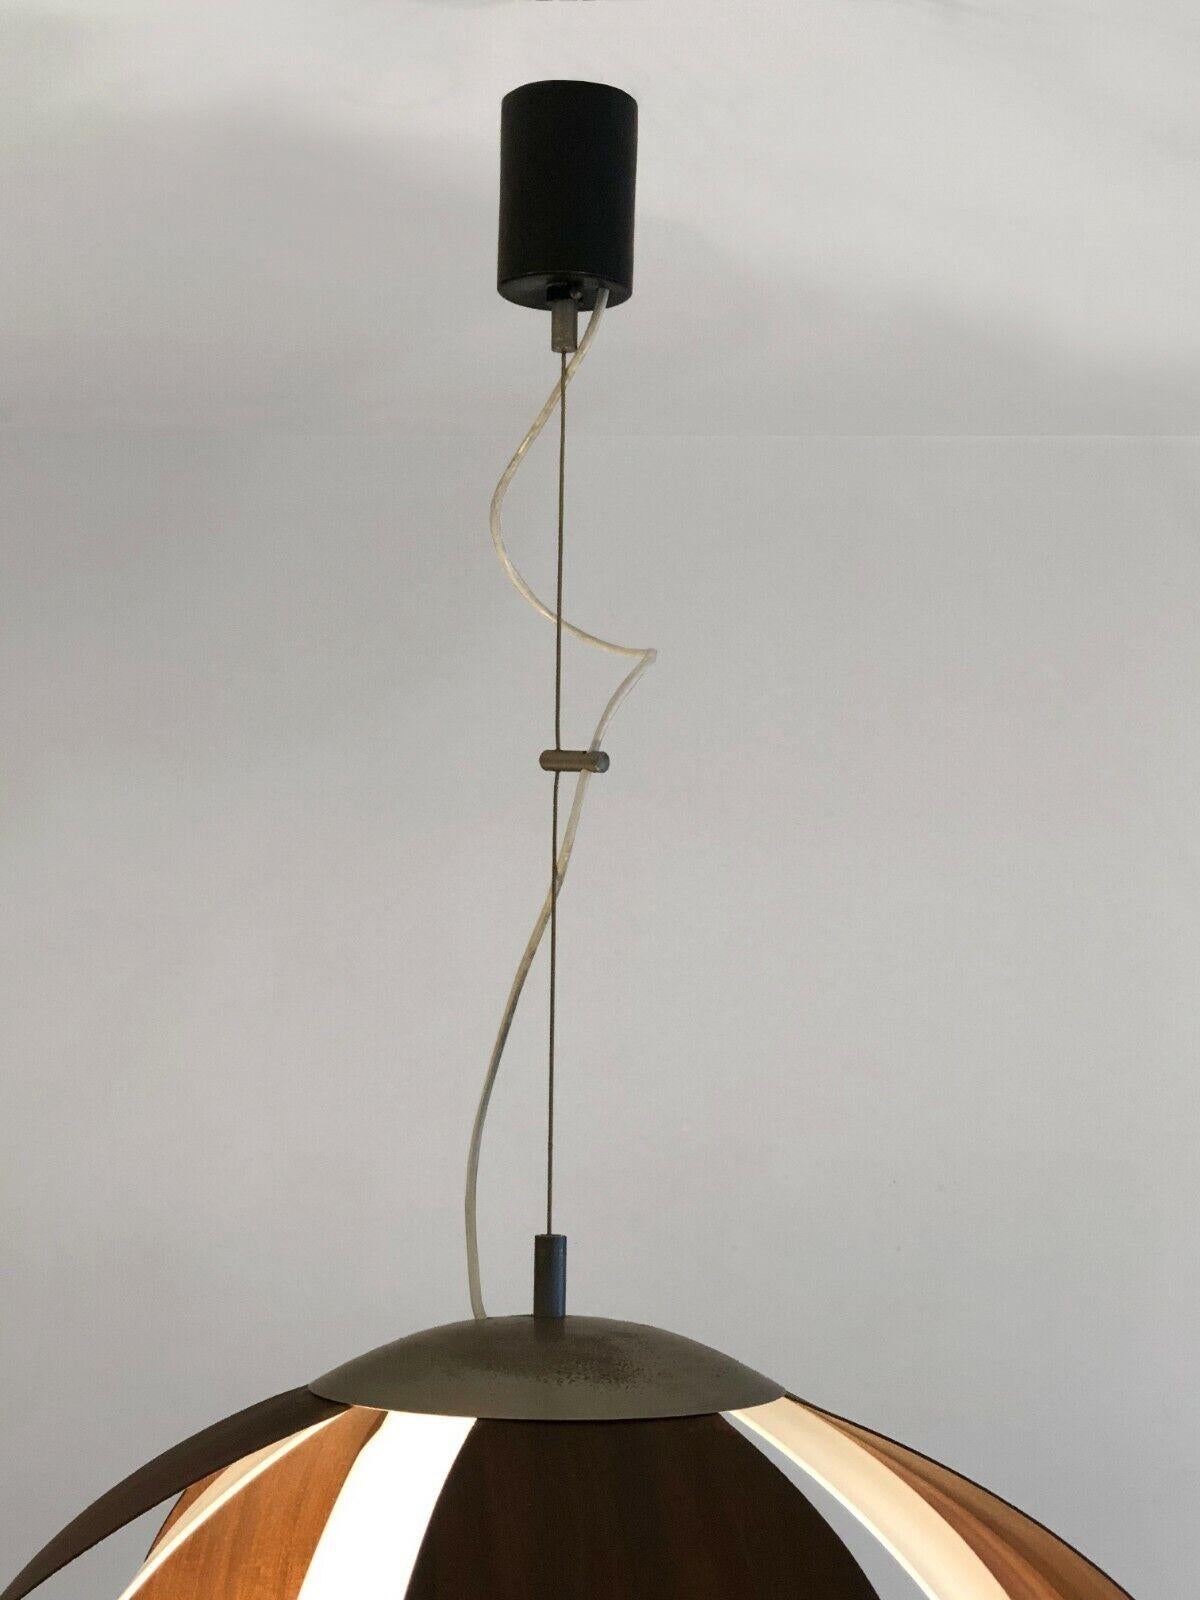 Plexiglass A SPACE-AGE Modular CEILING FIXTURE by GOFFREDO REGGIANI, Italy 1960 For Sale